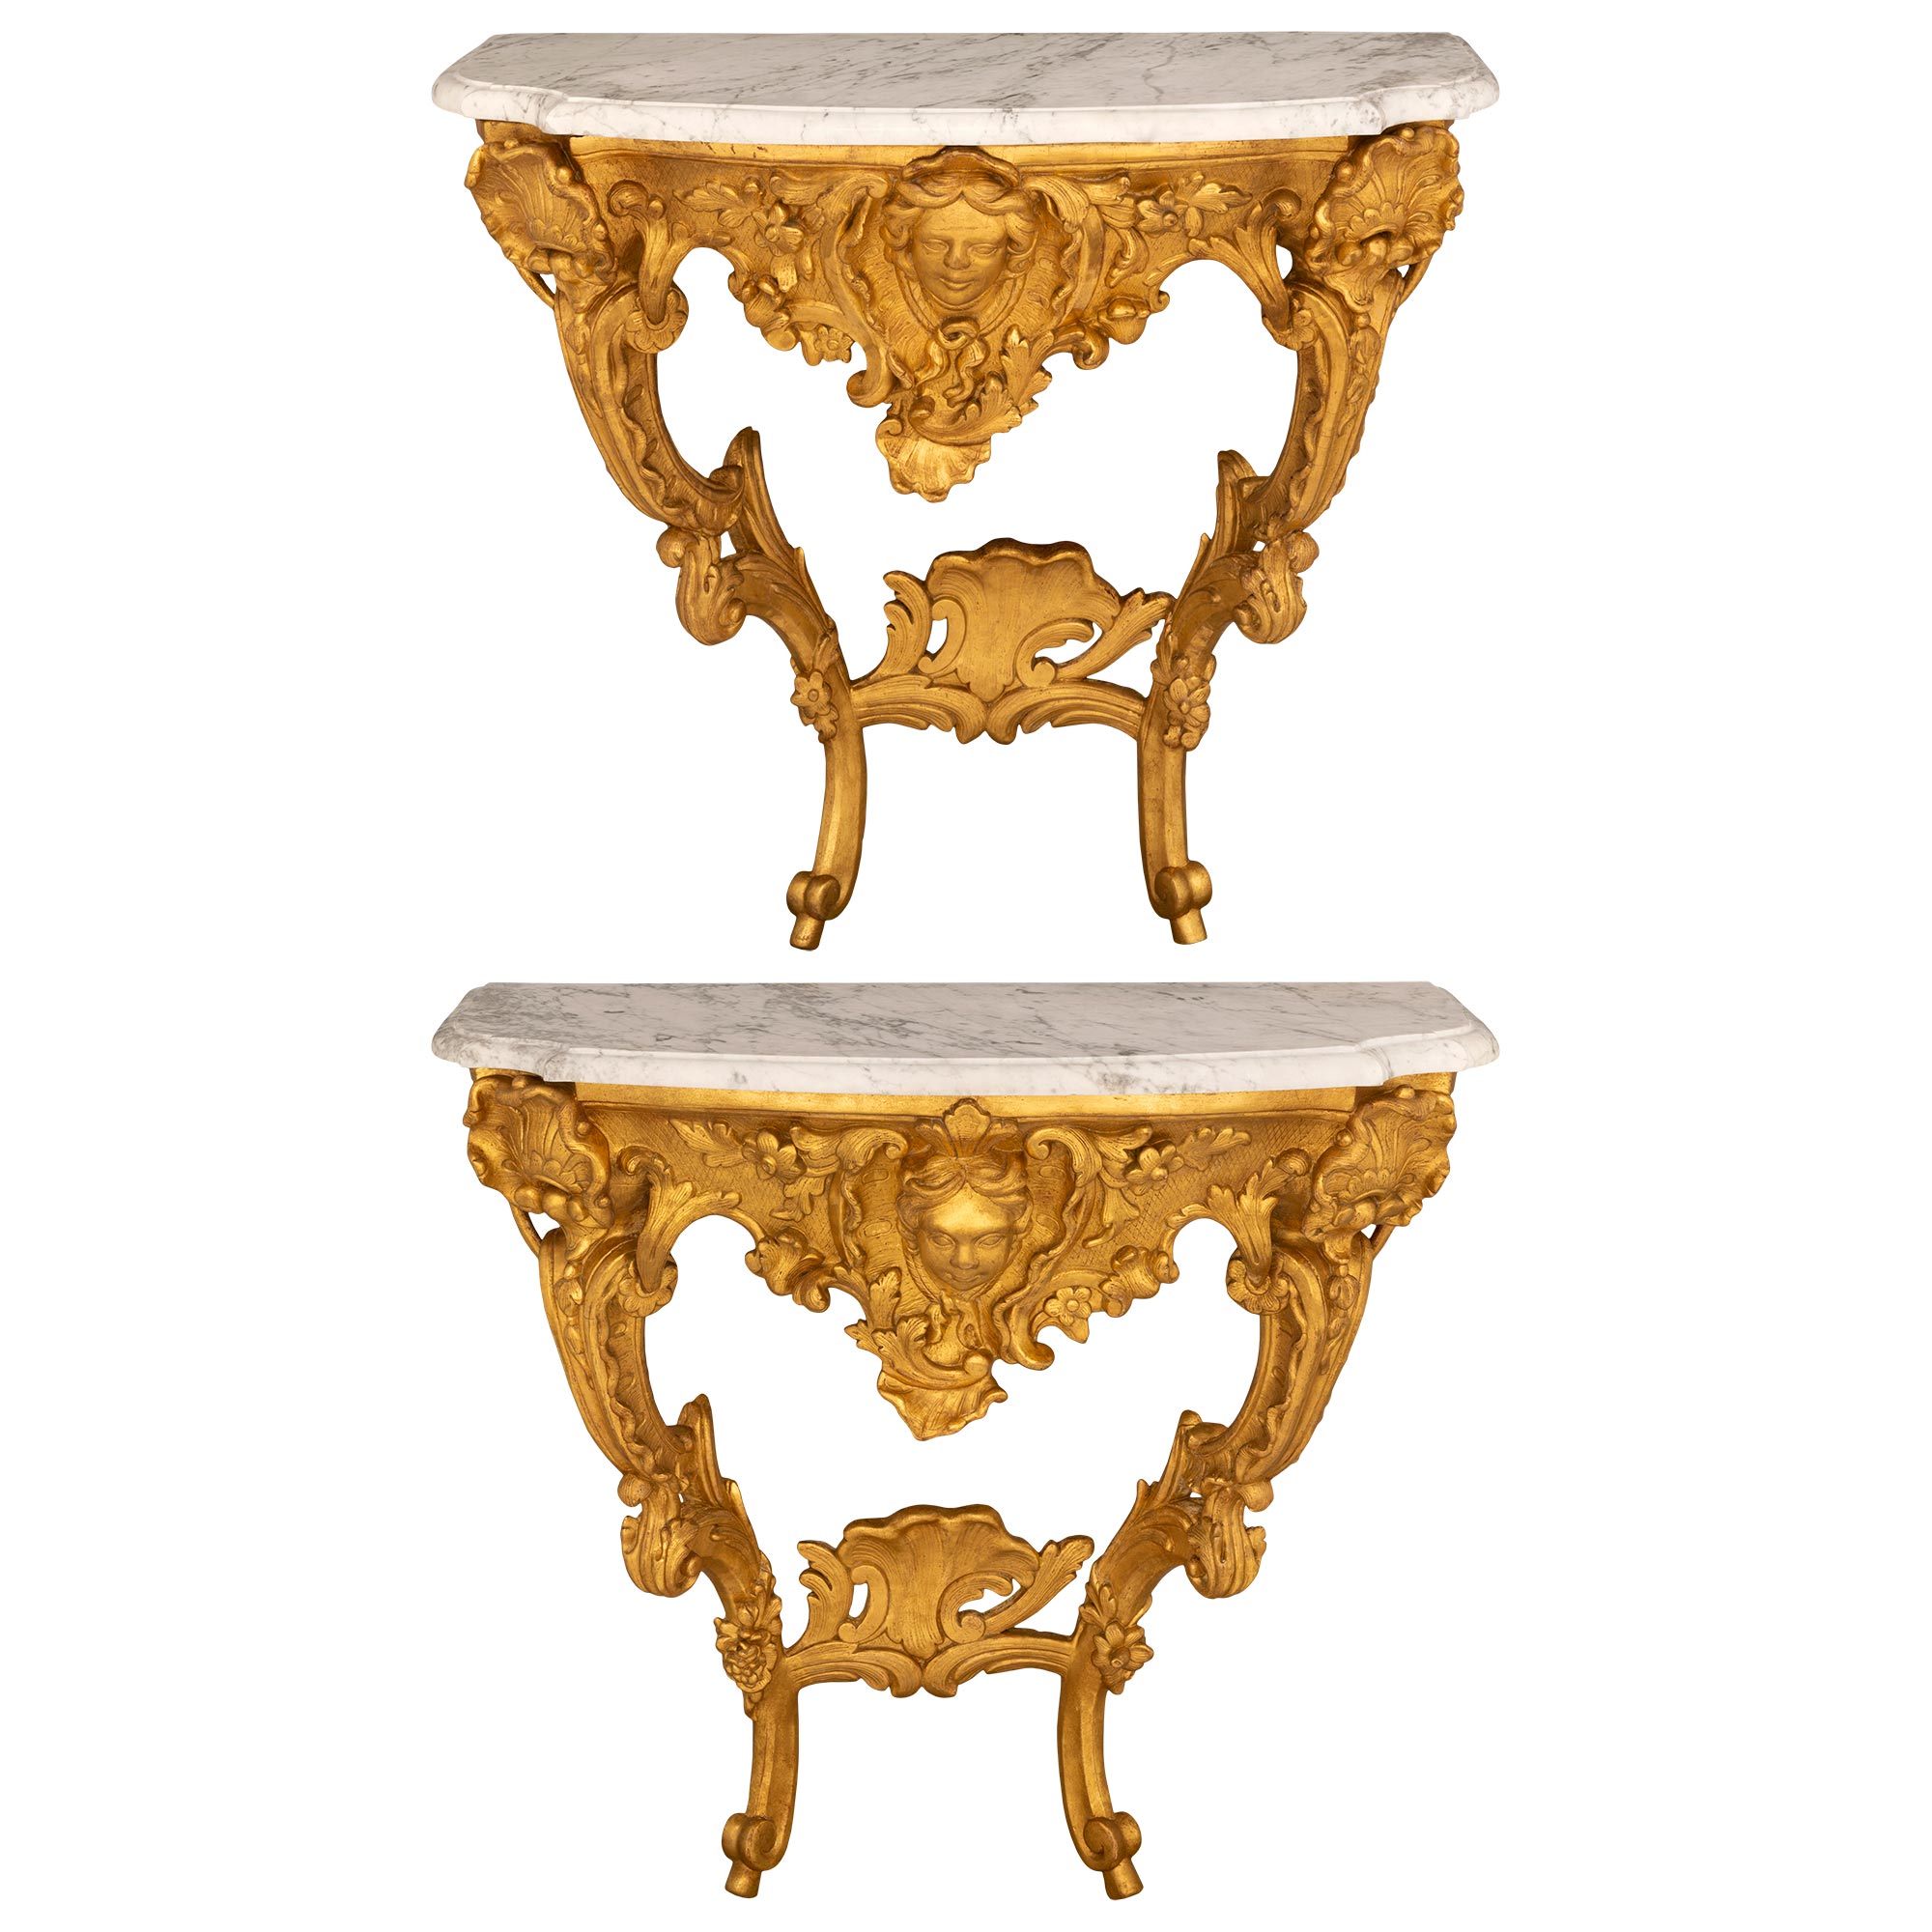 True Pair of Italian 18th Century Louis XV Period Giltwood and Marble Consoles